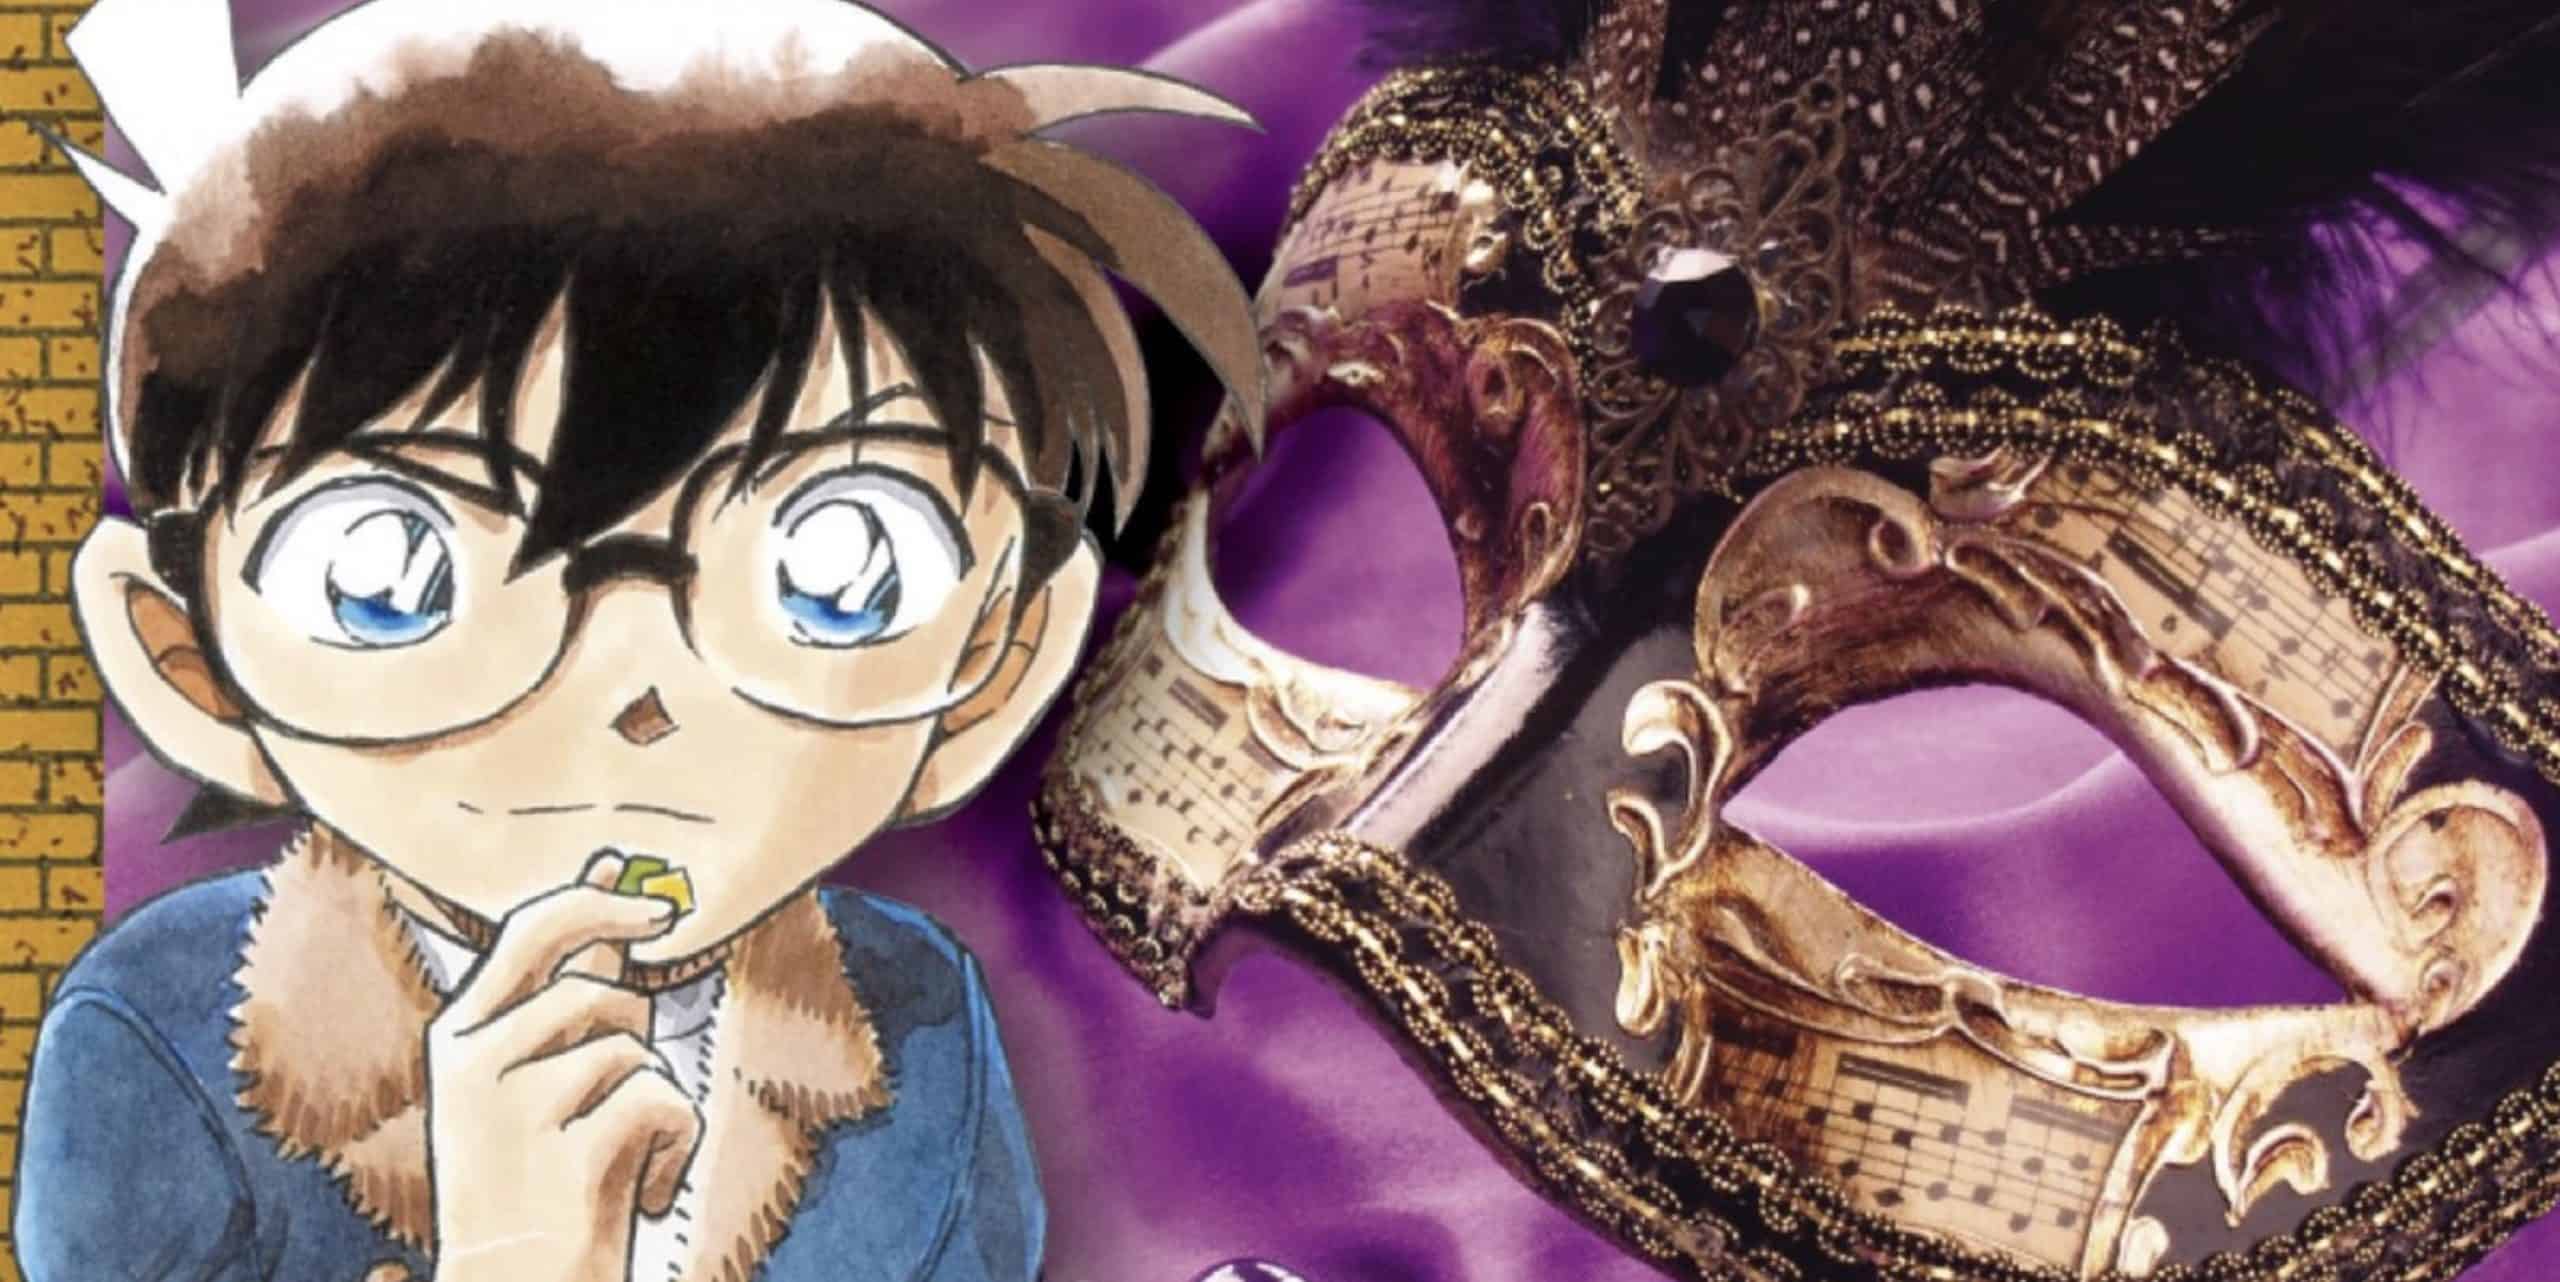 Detective Conan Chapter 1117 release date